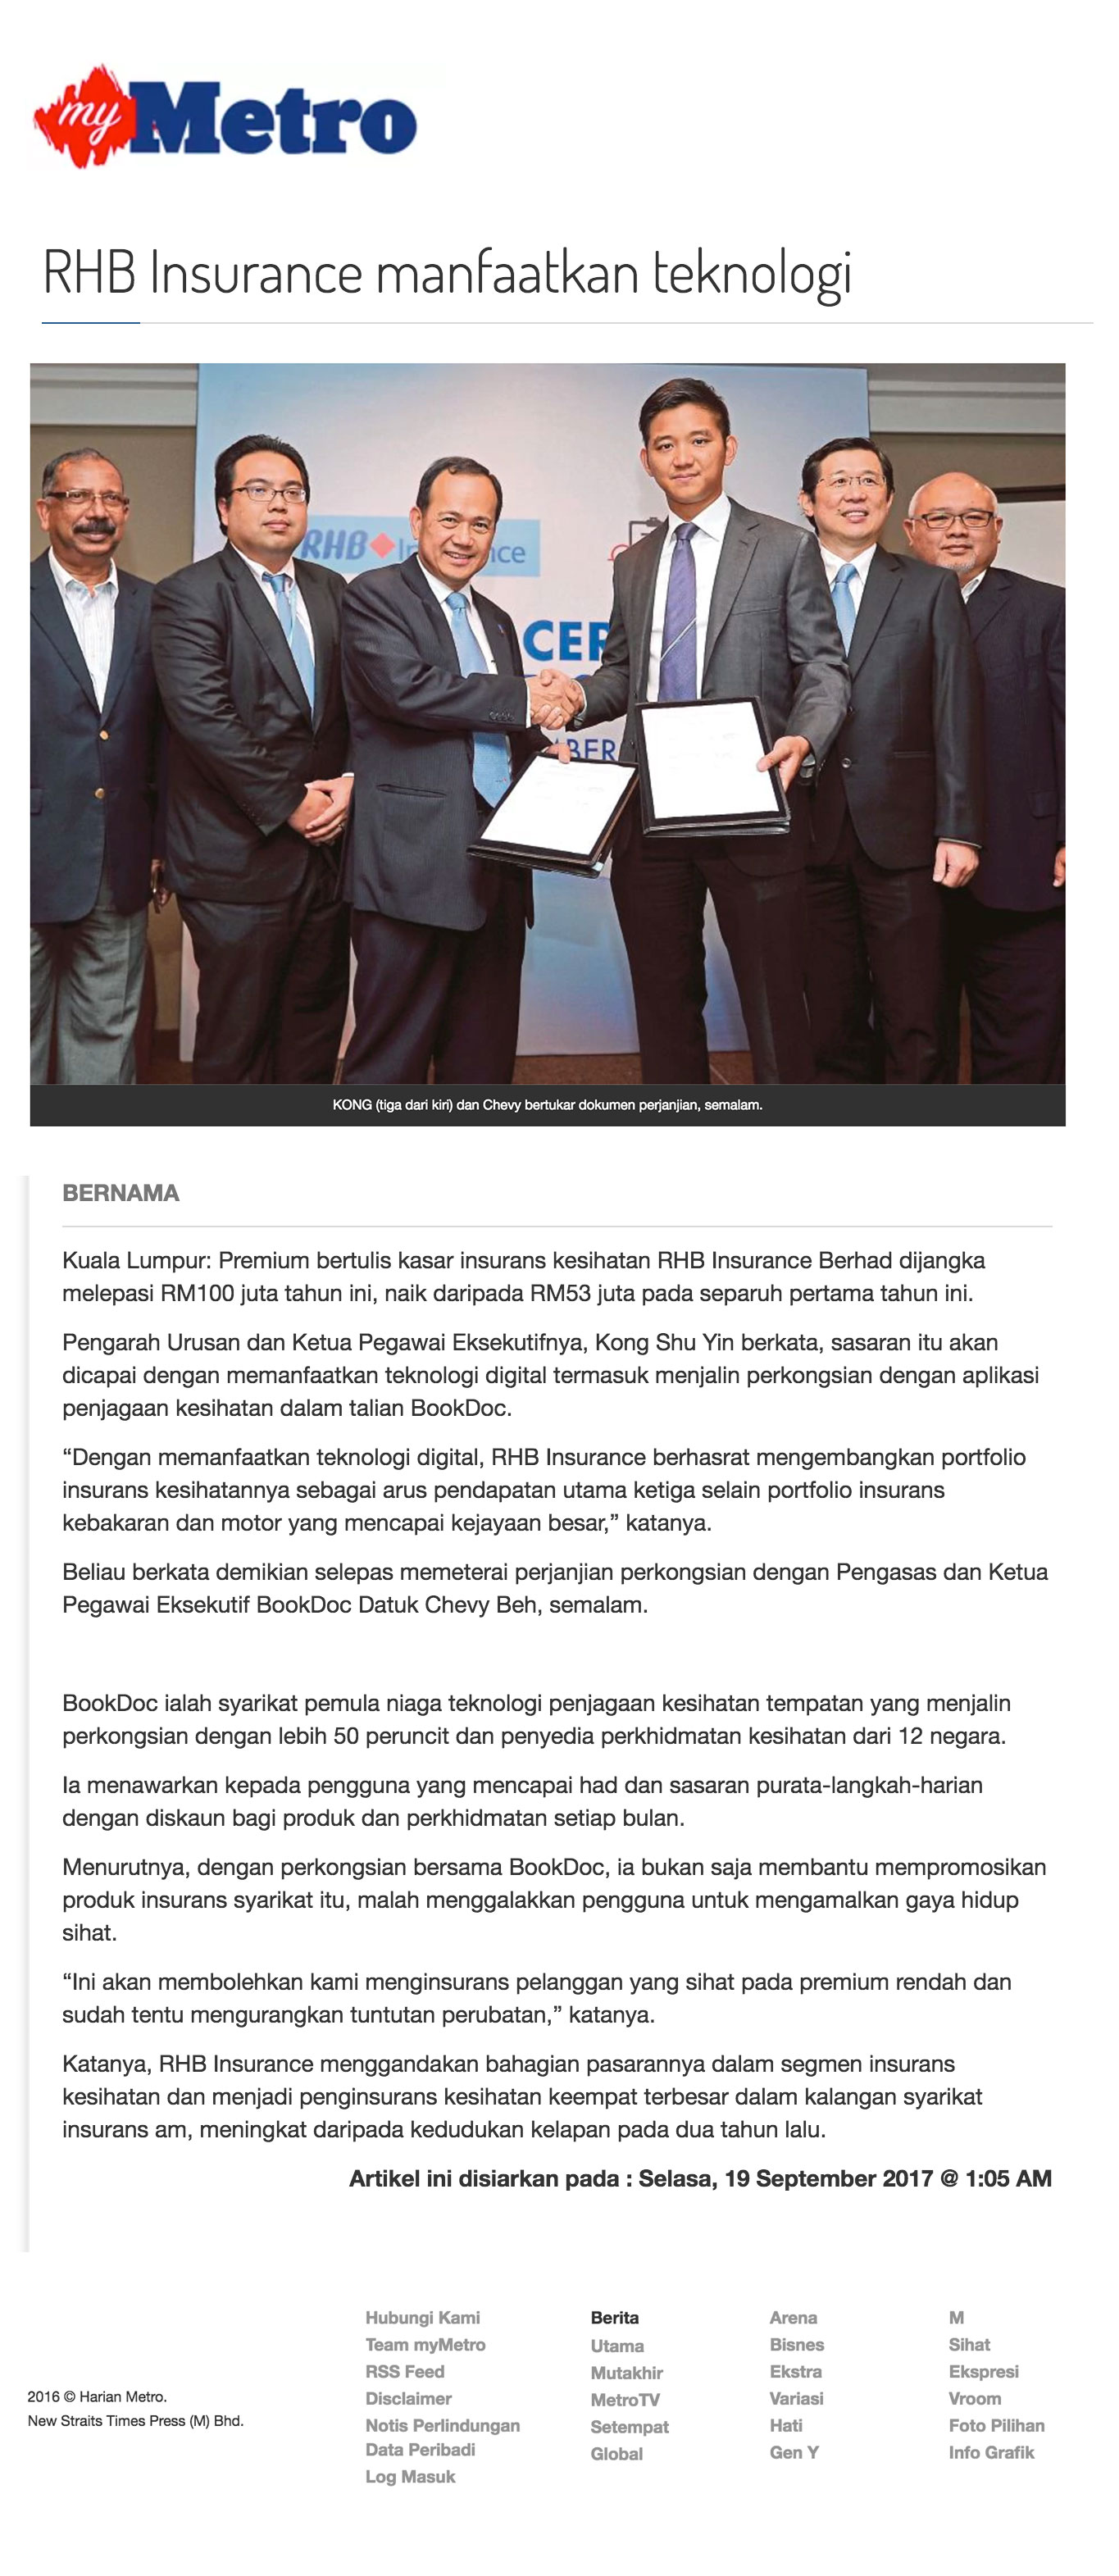 BookDoc on Harian Metro, BookDoc partners with RHB Insurance